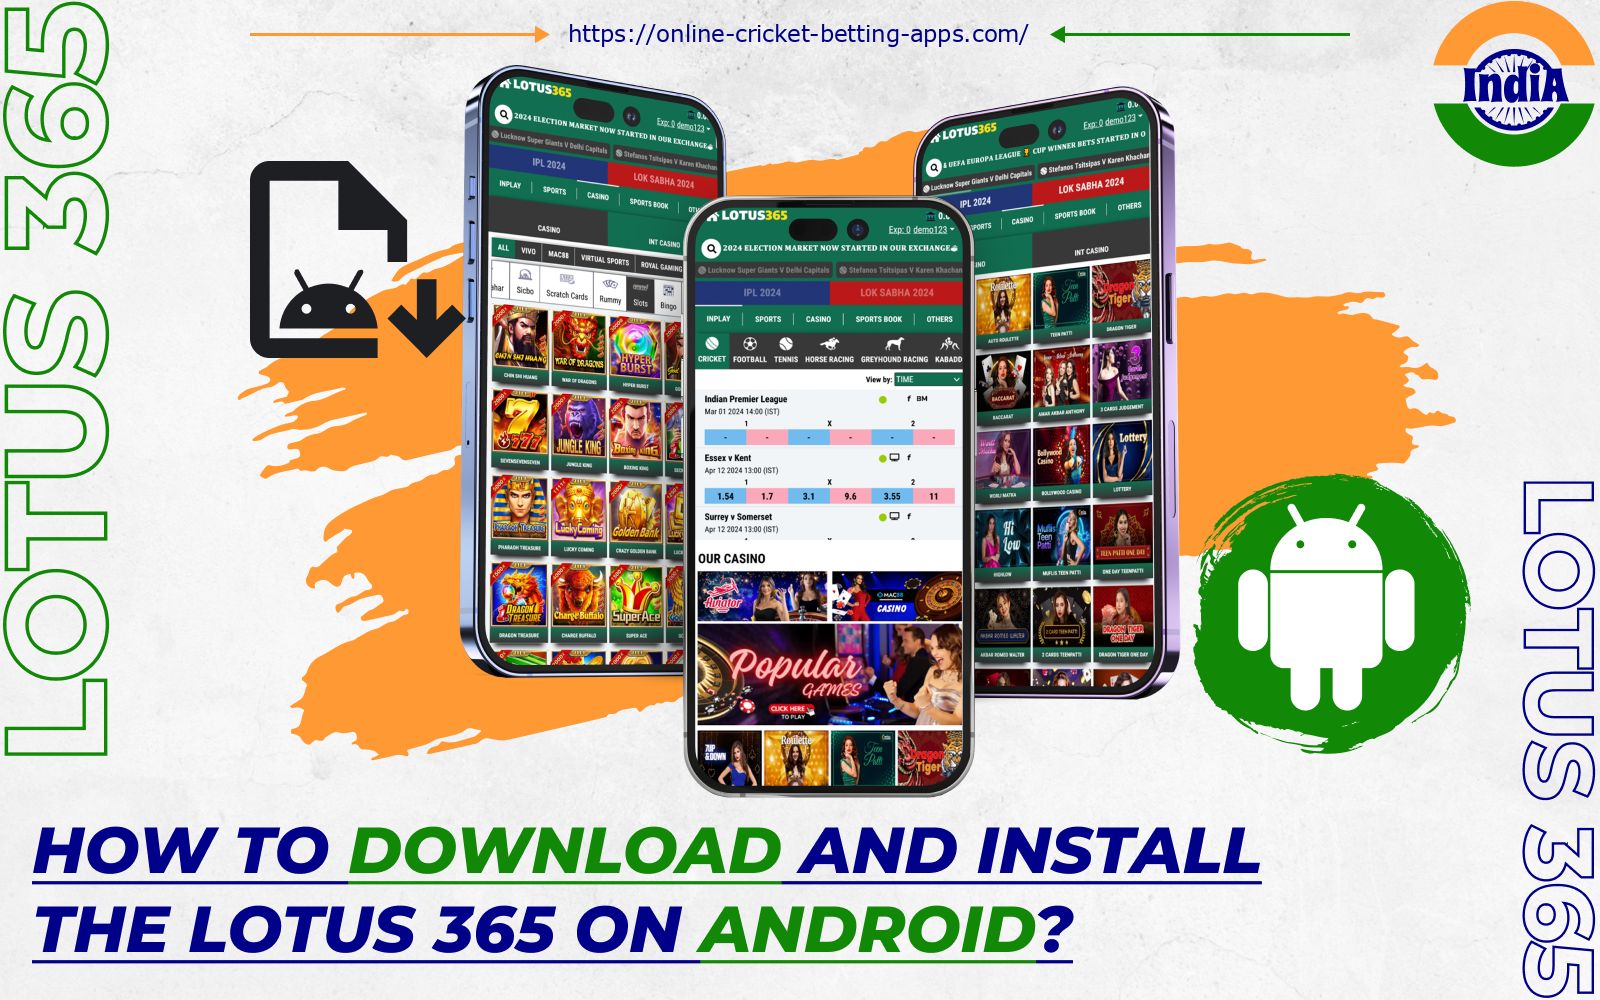 After installing the free Lotus 365 app for Android, Indian bettors will be able to enjoy sports betting and casino games